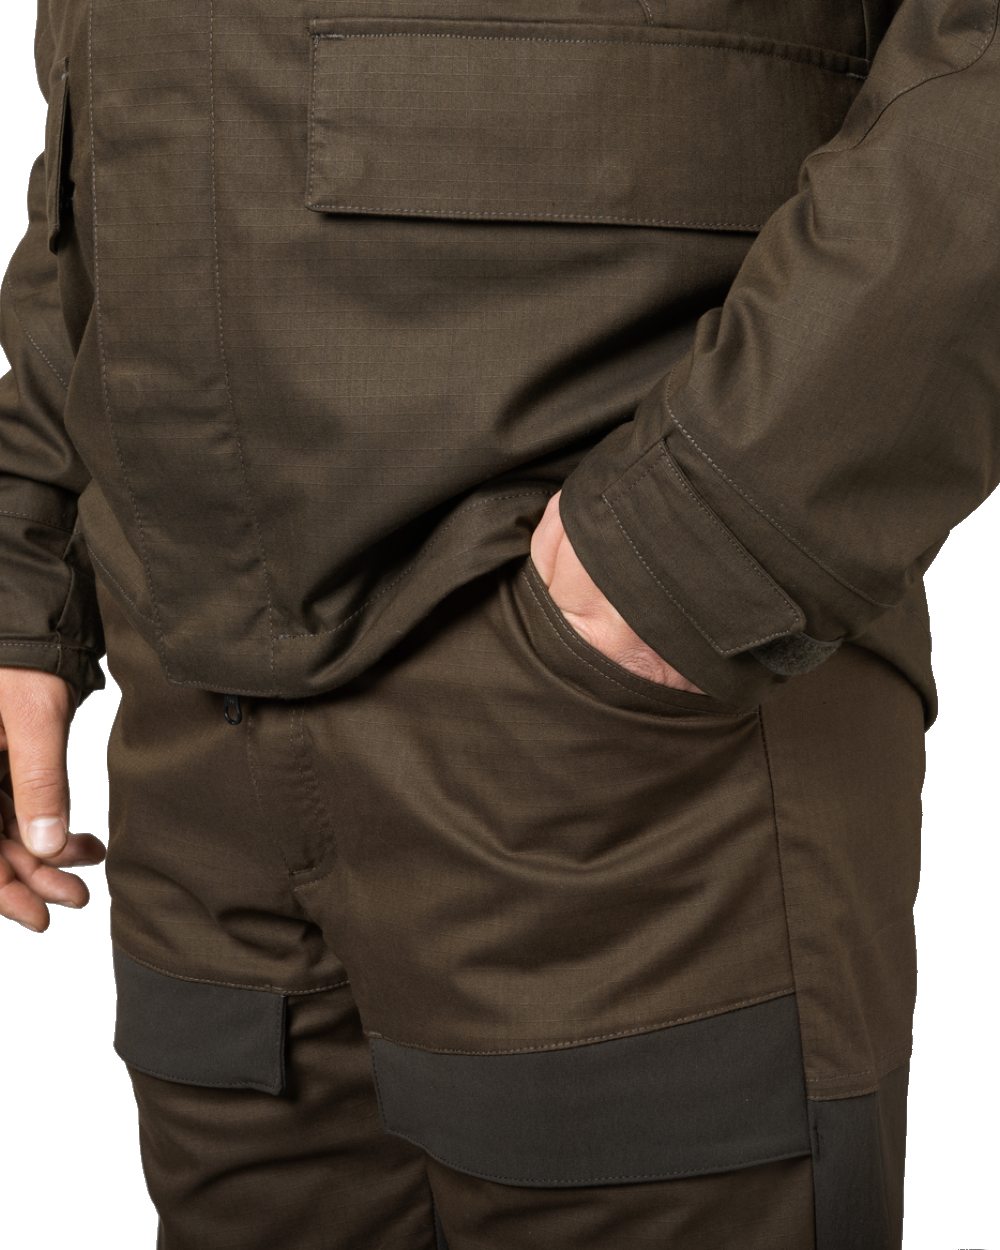 Willow Green/Shadow Brown coloured Harkila Nordic Hunter HWS Trousers on white background